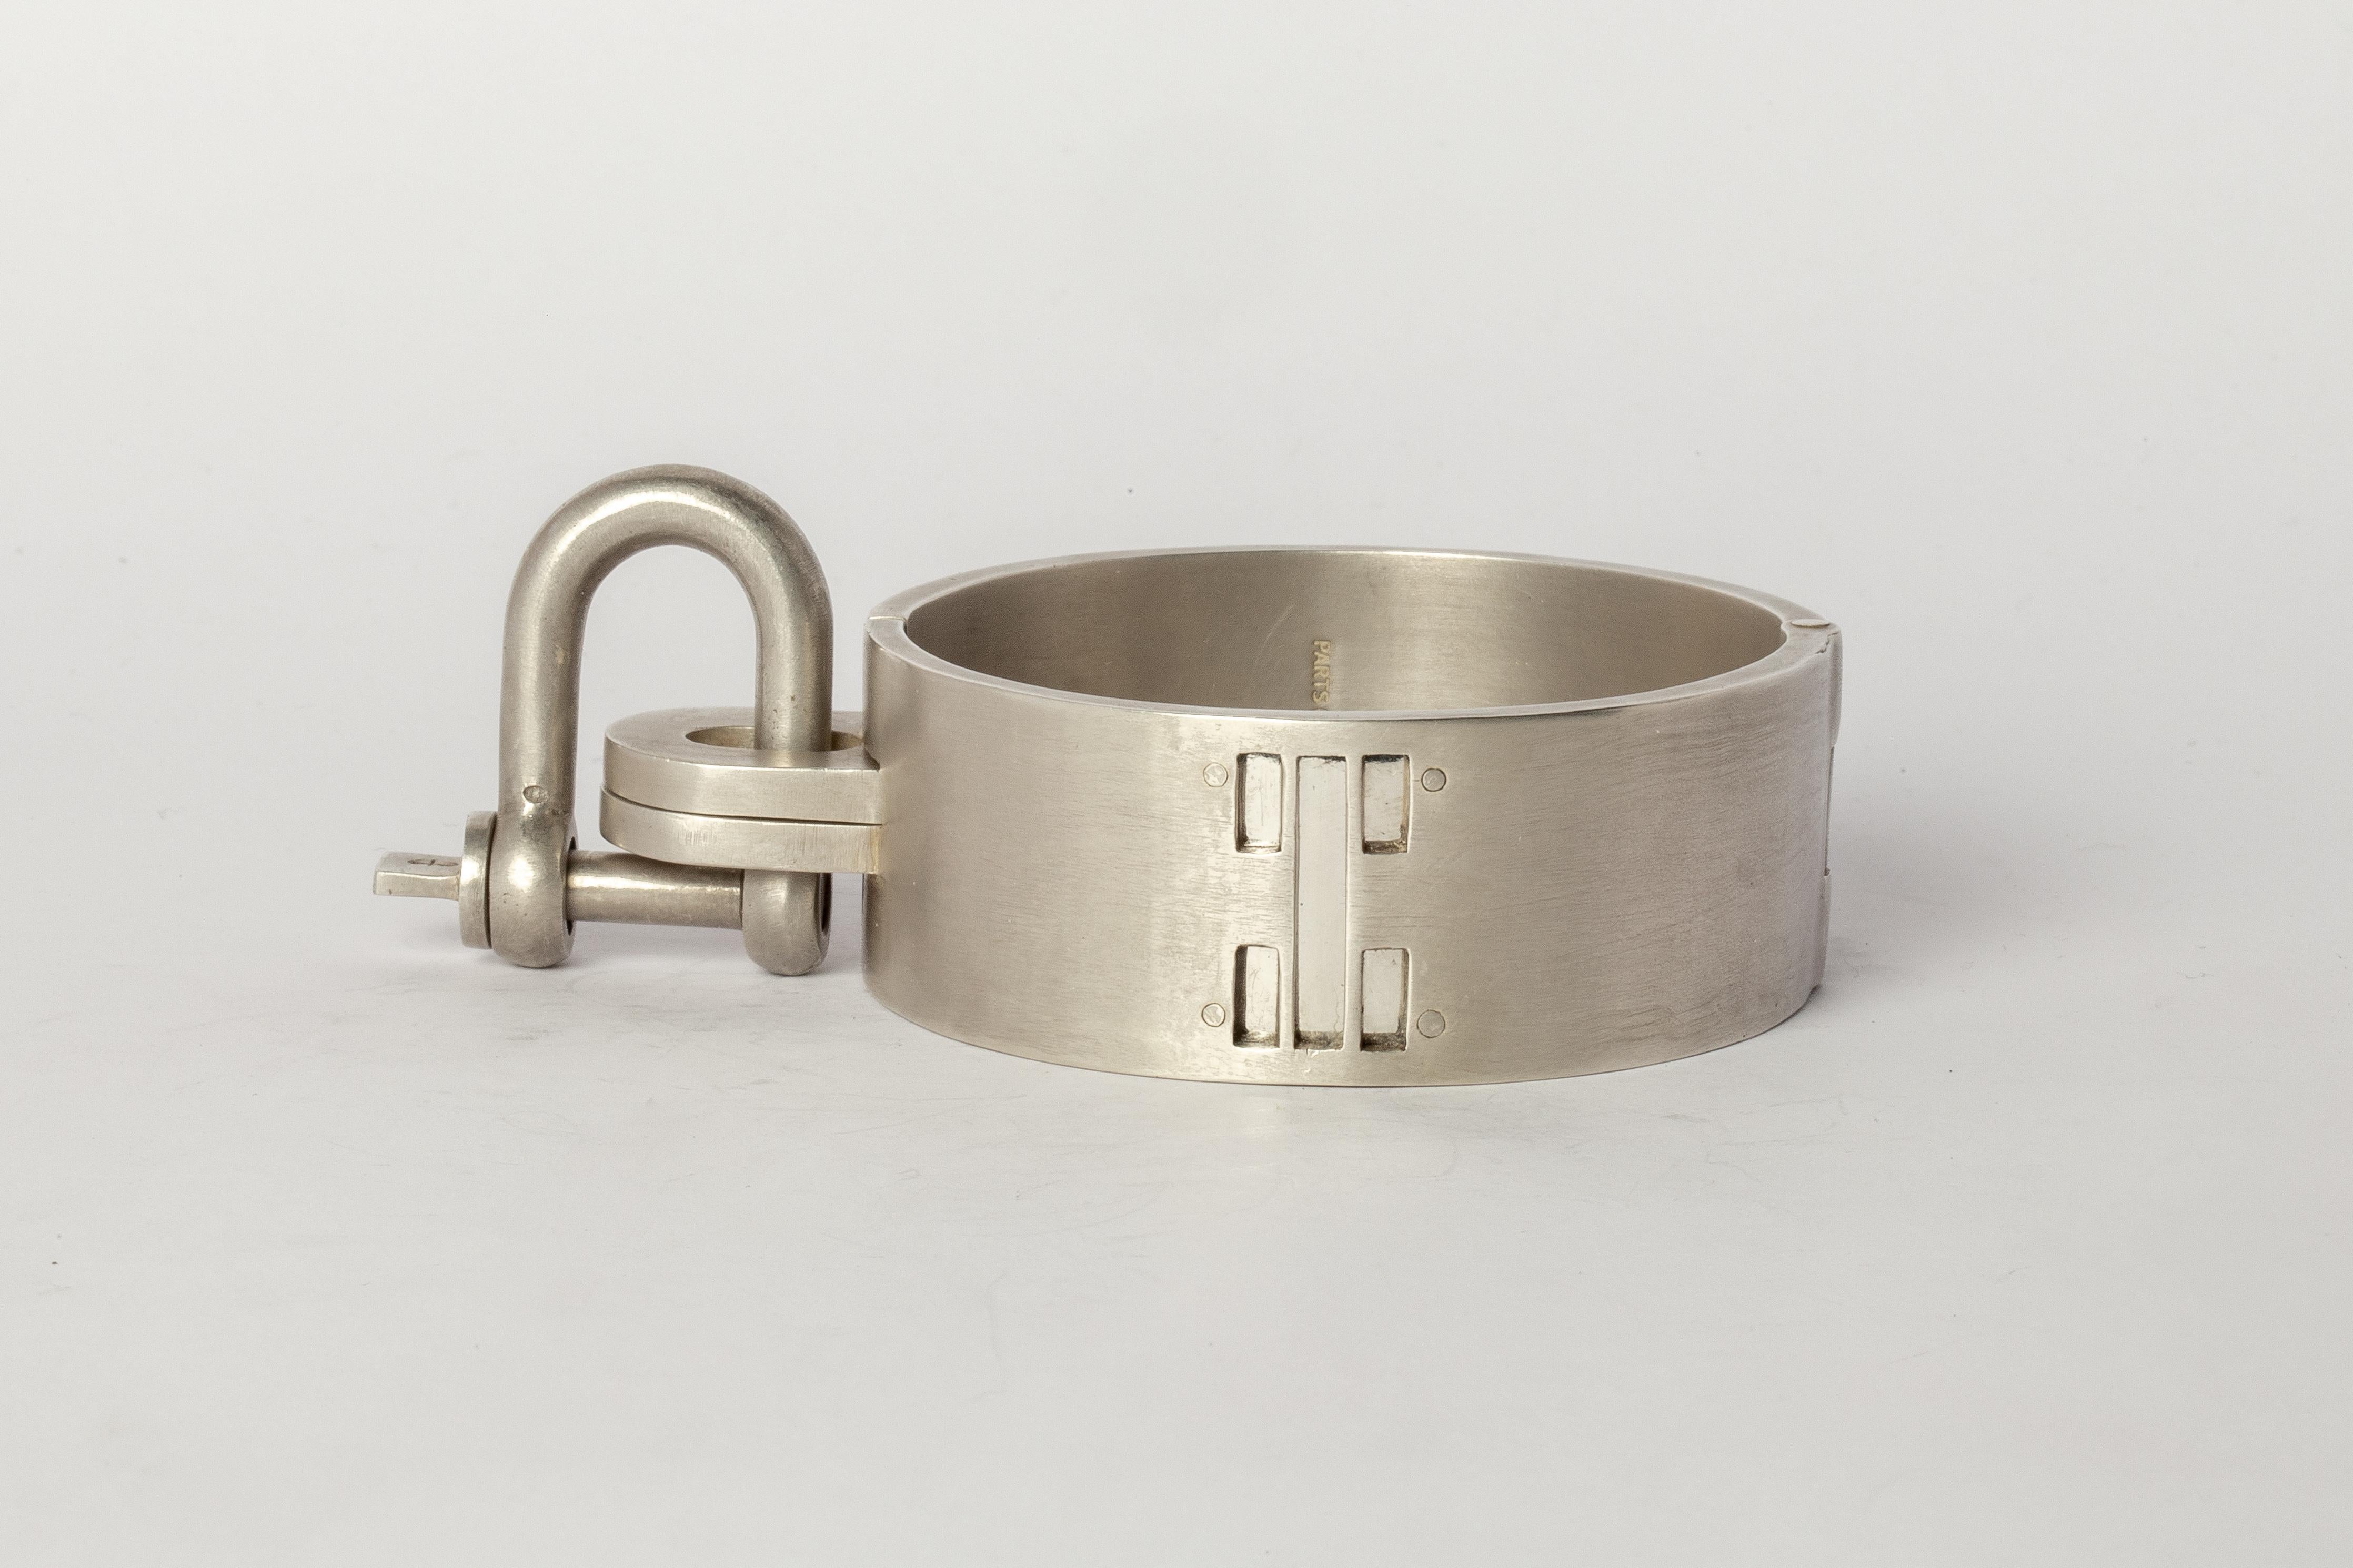 Bracelet in sterling silver, dipped in acid to create a subdued surface. Items with the potential use as restraints. The Charm System is an interrelated group of products that can be mixed and matched or worn individually. Dimensions U-bolt (H × W):